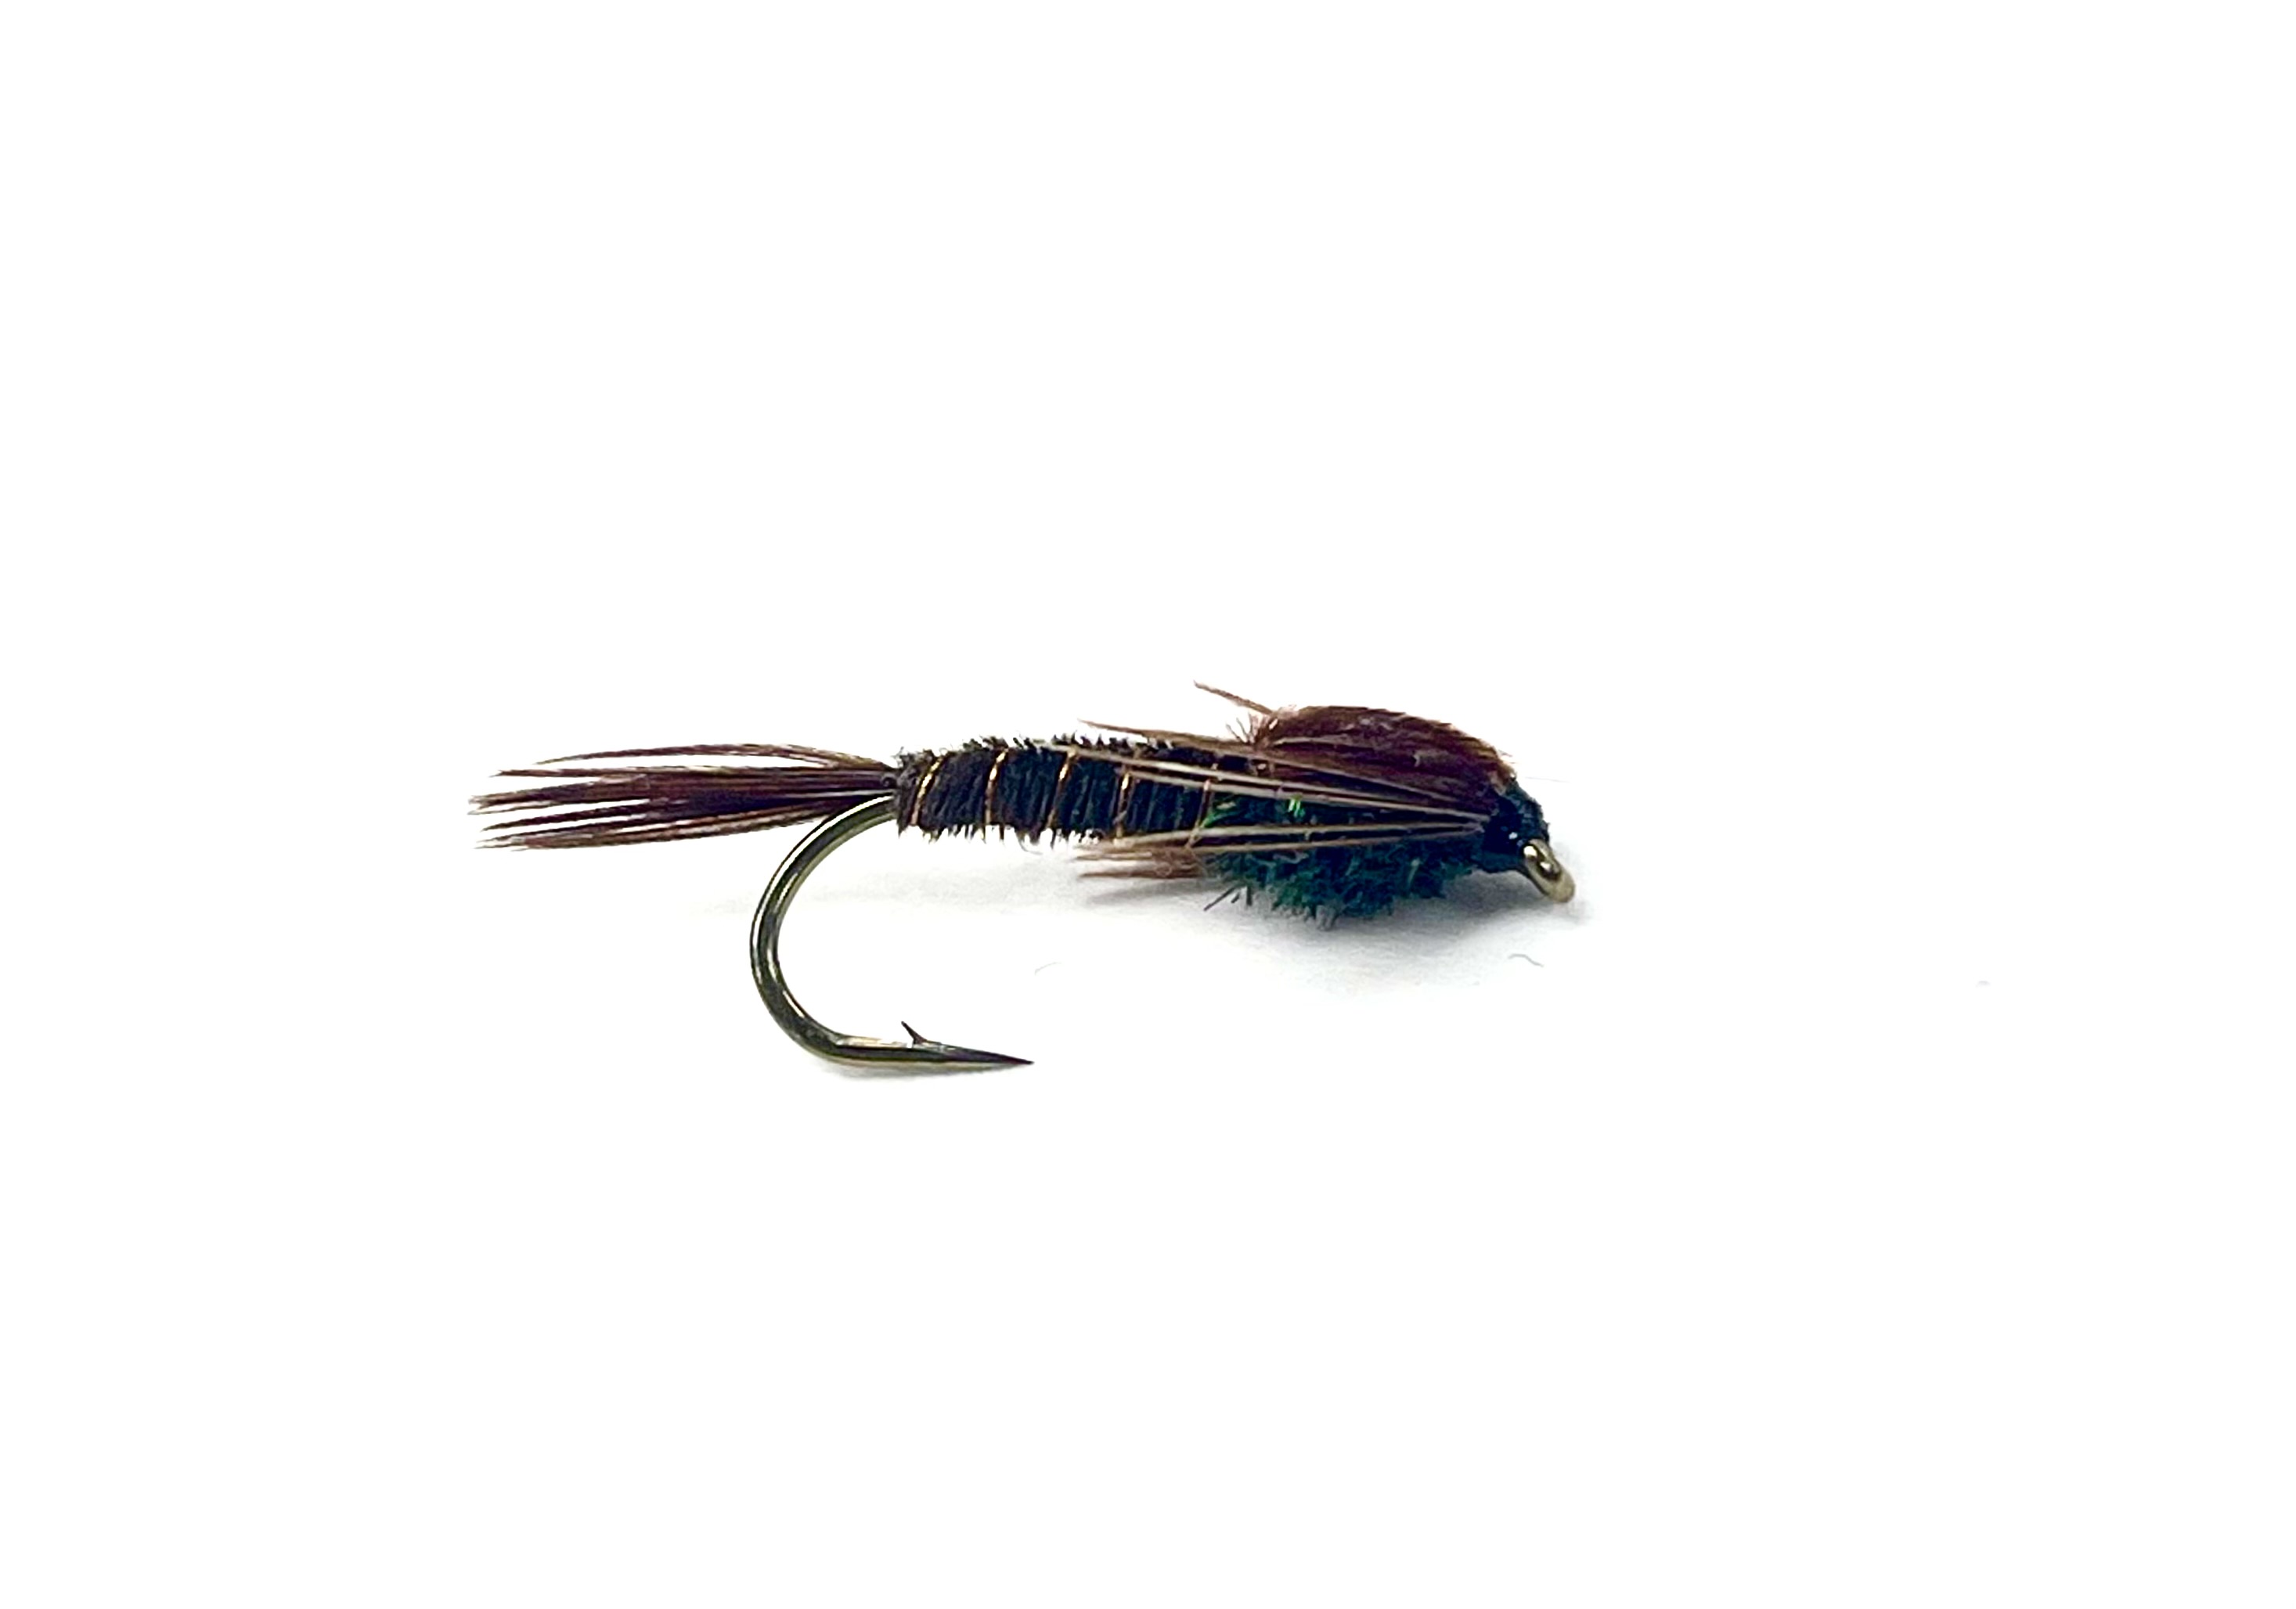 FAD Pheasant Tail Nymph - Natural - Size 18